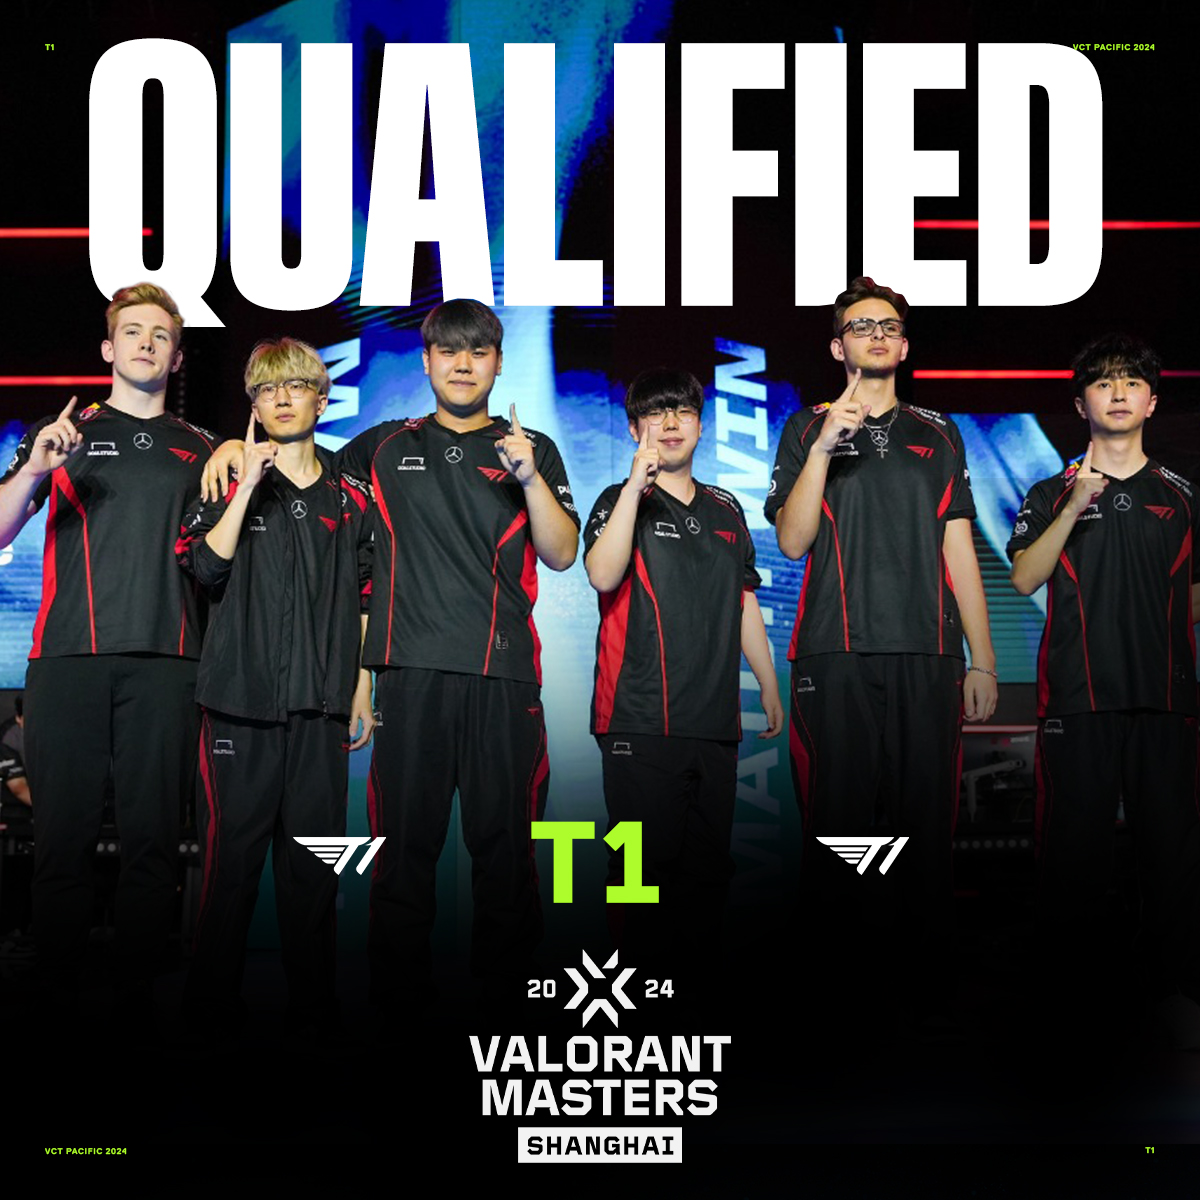 OUR FIRST REPRESENTATIVES TO #VALORANTMasters SHANGHAI, @T1! #VCTPacific